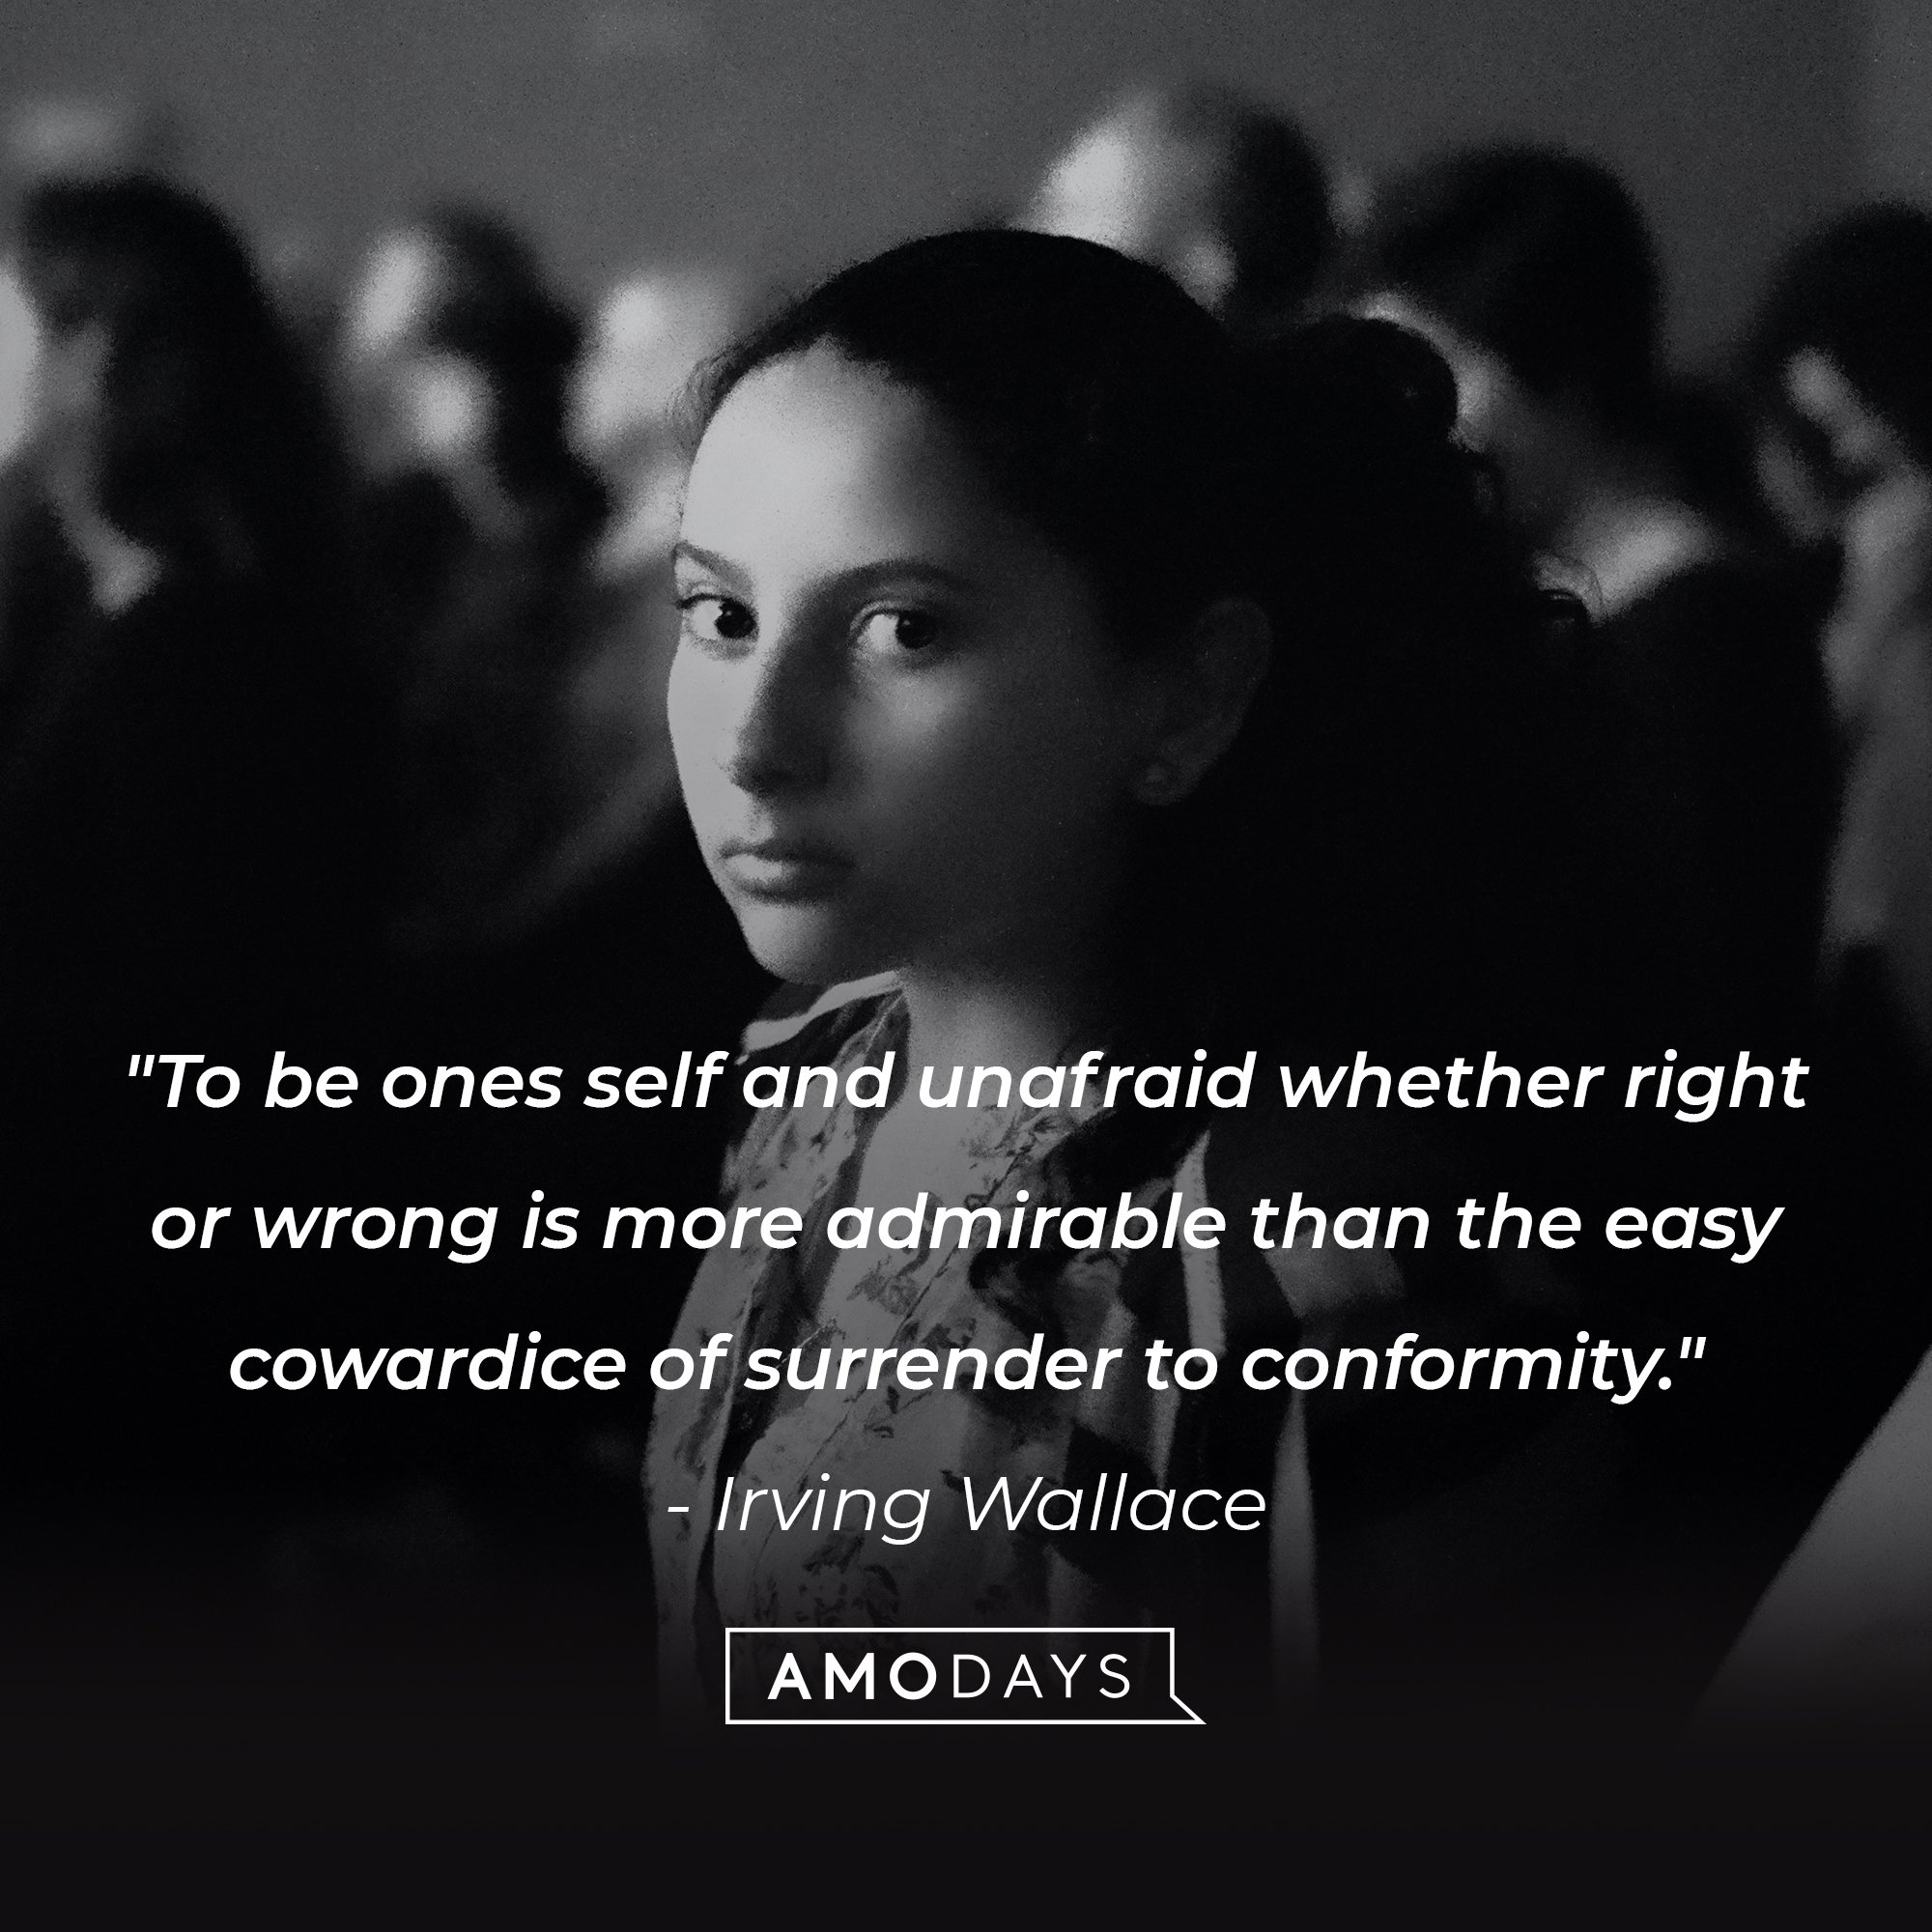 Irving Wallace’s quote: "To be ones self and unafraid whether right or wrong is more admirable than the easy cowardice of surrender to conformity." | Image: AmoDays